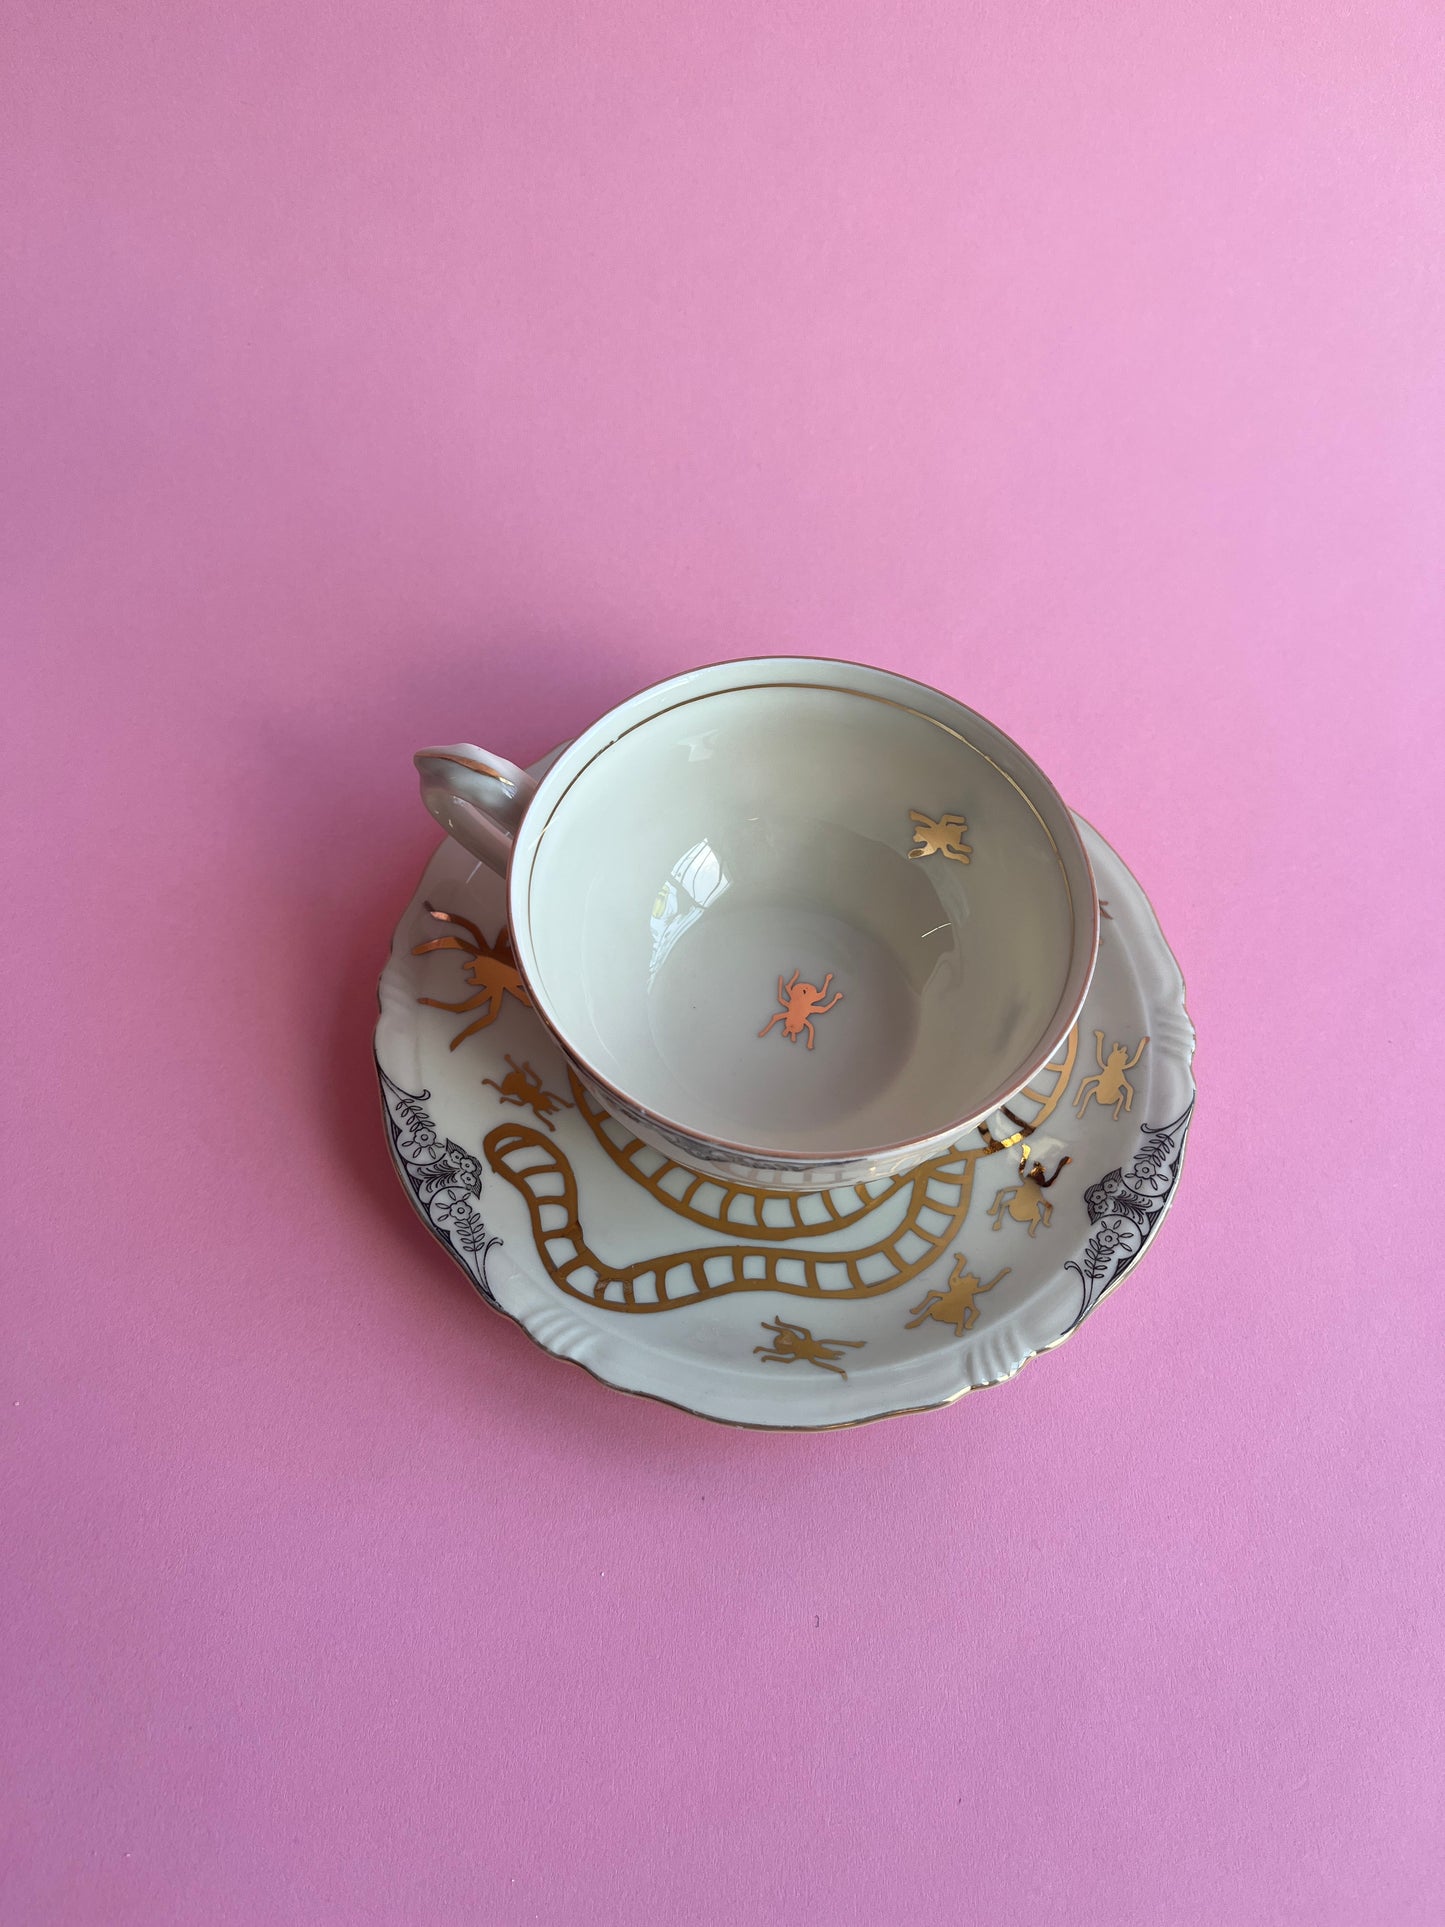 Thrifted Gold: Golden Bugs Teacup And Saucer